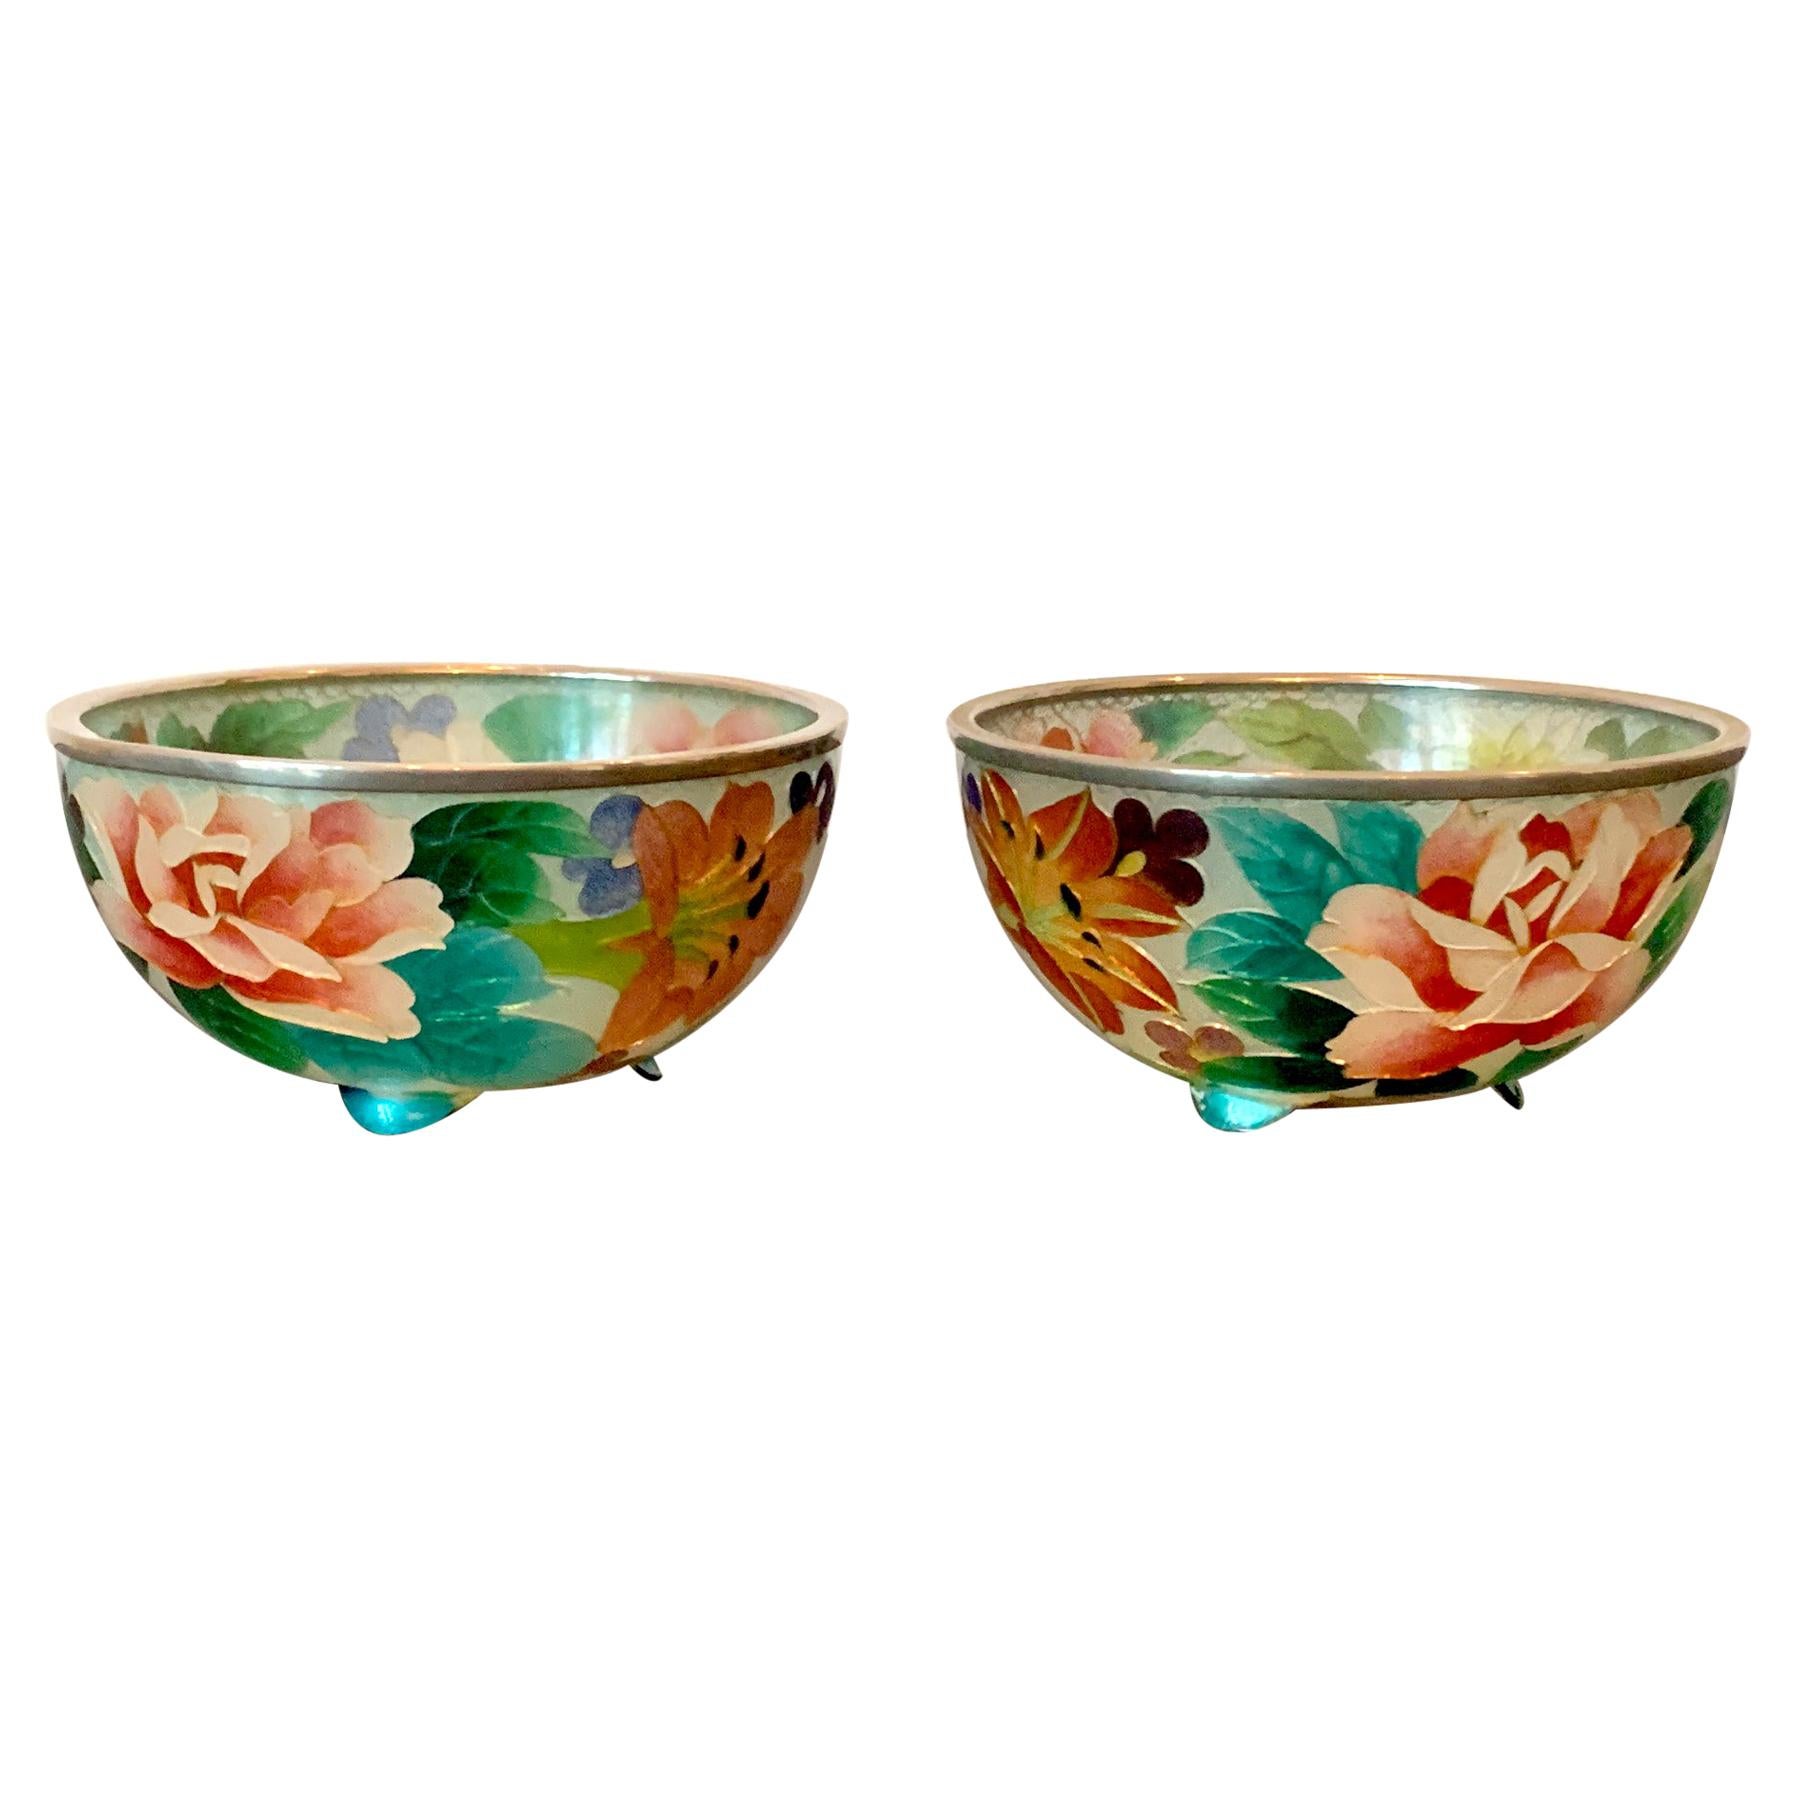 Pair of Early Japanese Plique-a-Jour Bowls from Nagoya